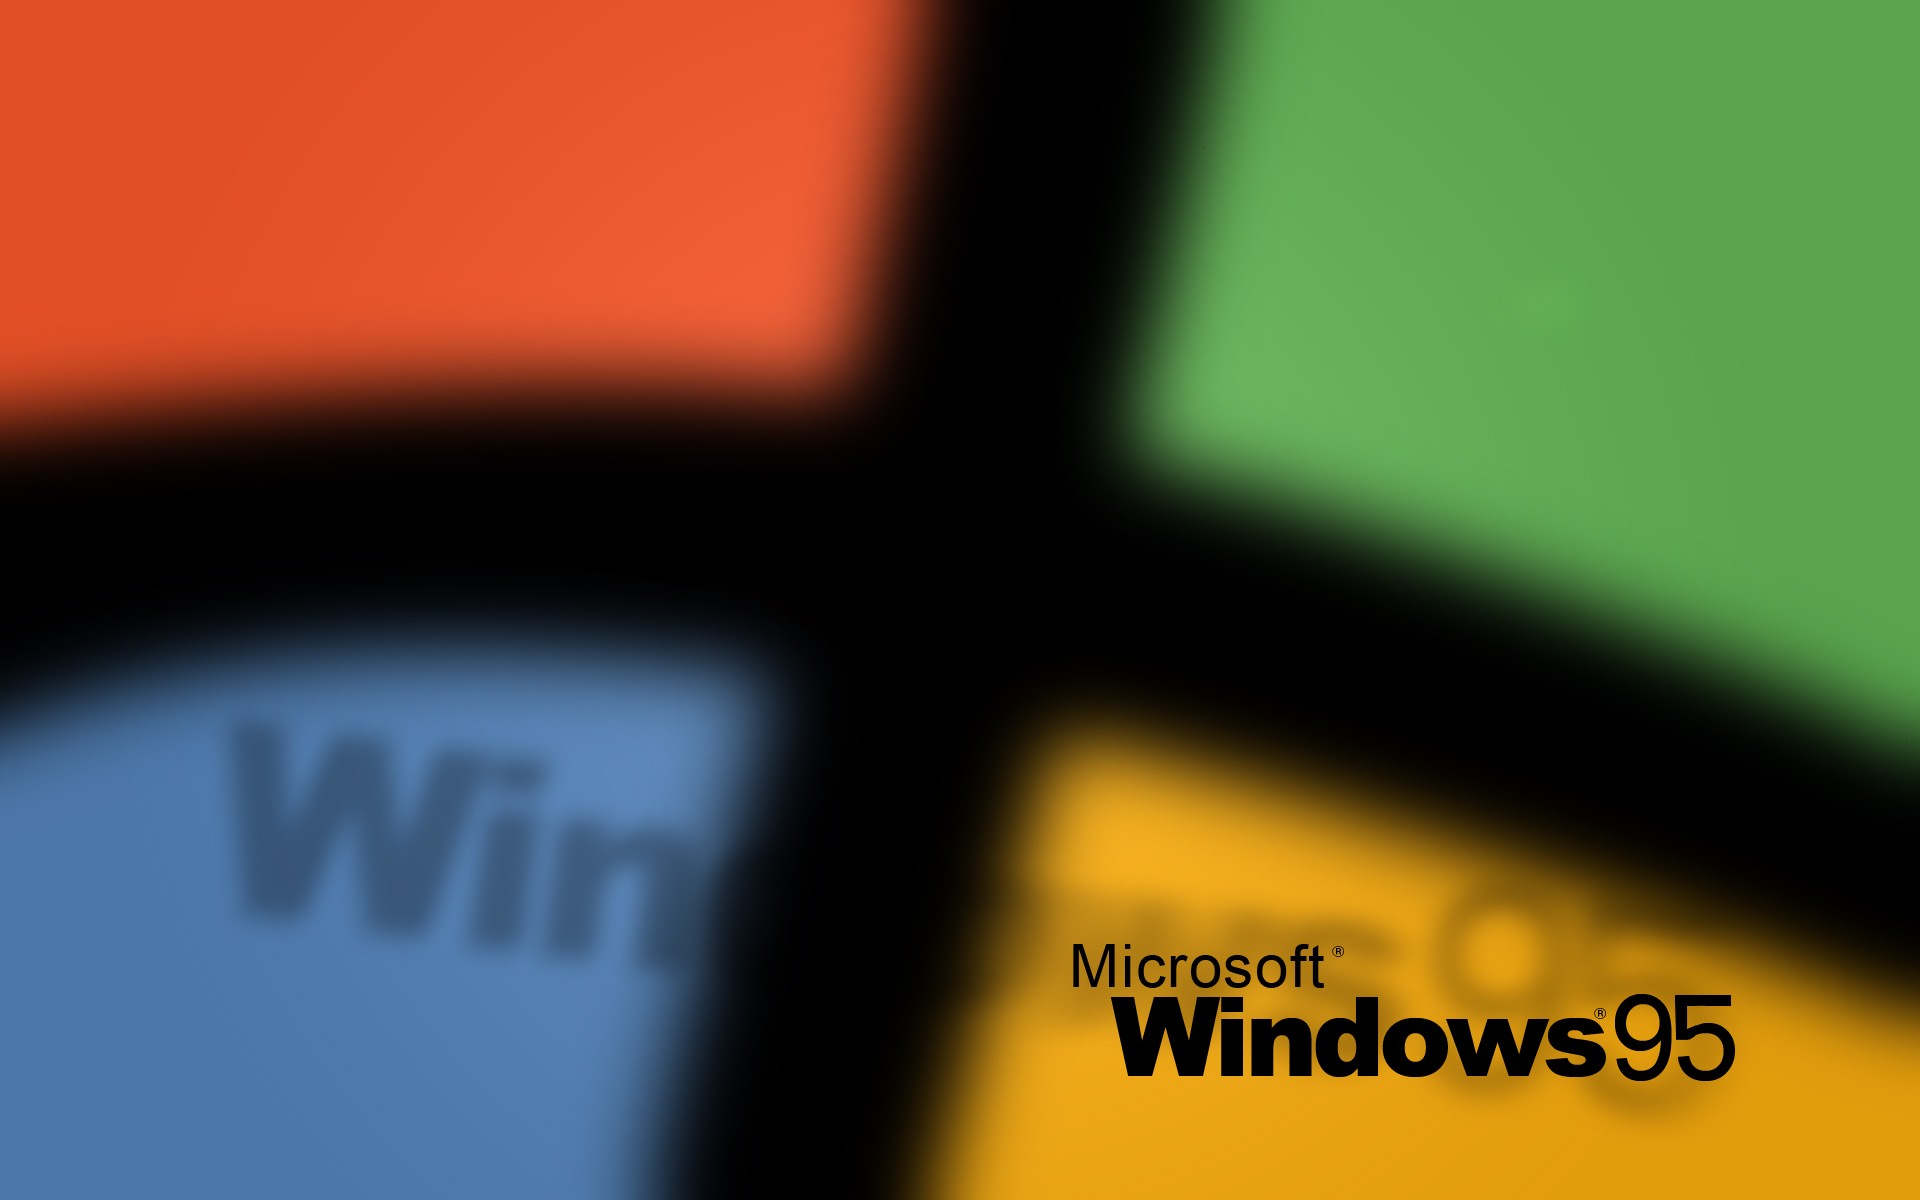 Windows 95 Operating Systems Vintage Wallpapers Hd Desktop And Mobile Backgrounds